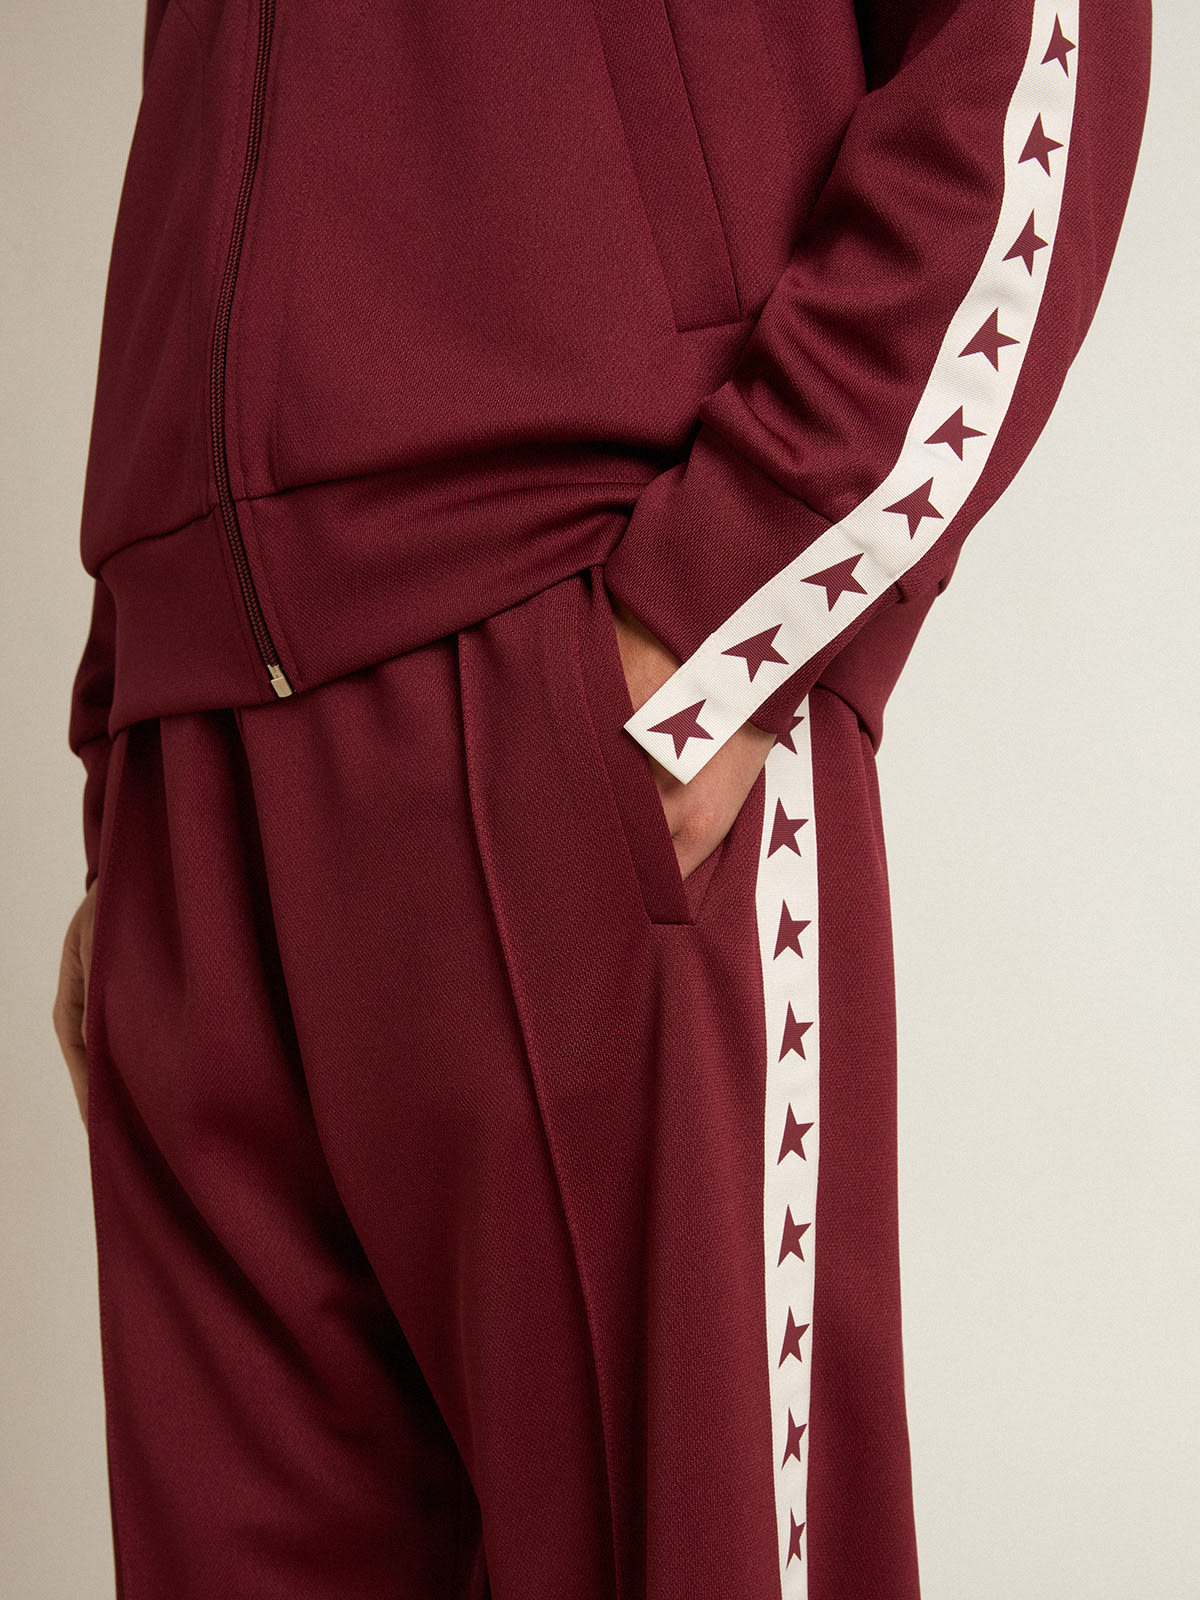 Golden Goose - Men’s burgundy zipped sweatshirt with white strip and contrasting stars in 